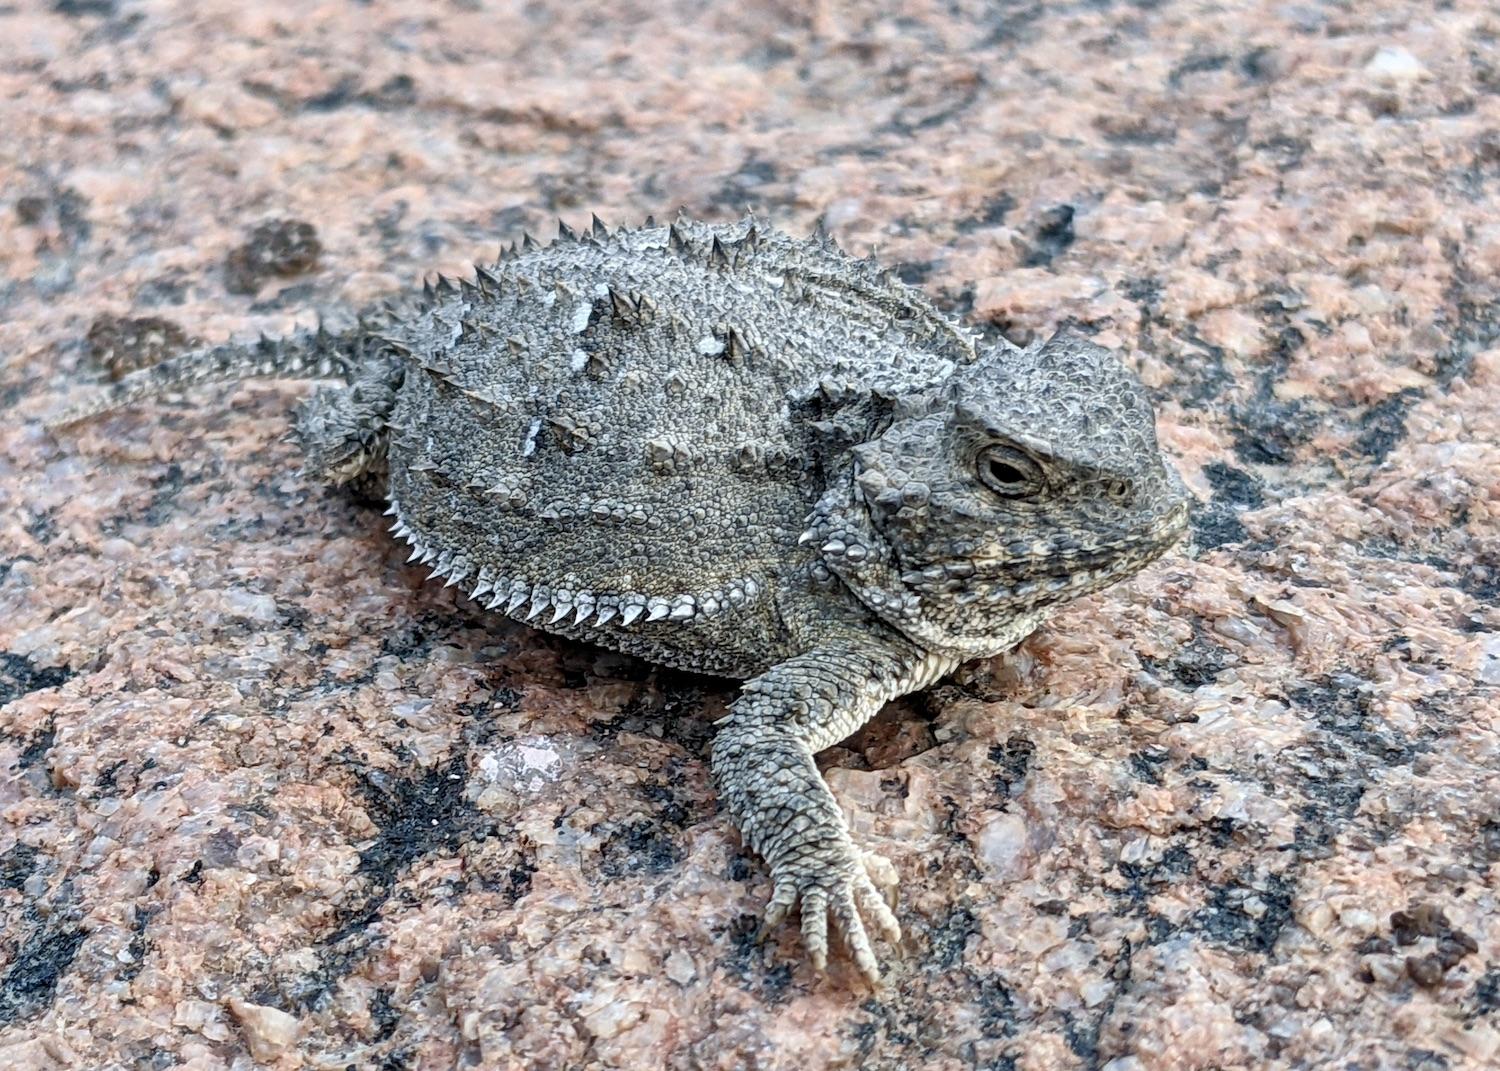 The Greater Short-horned Lizard is the only species of lizard found in Alberta and Saskatchewan. The species occurs farther north than any other iguanid lizard species globally. 